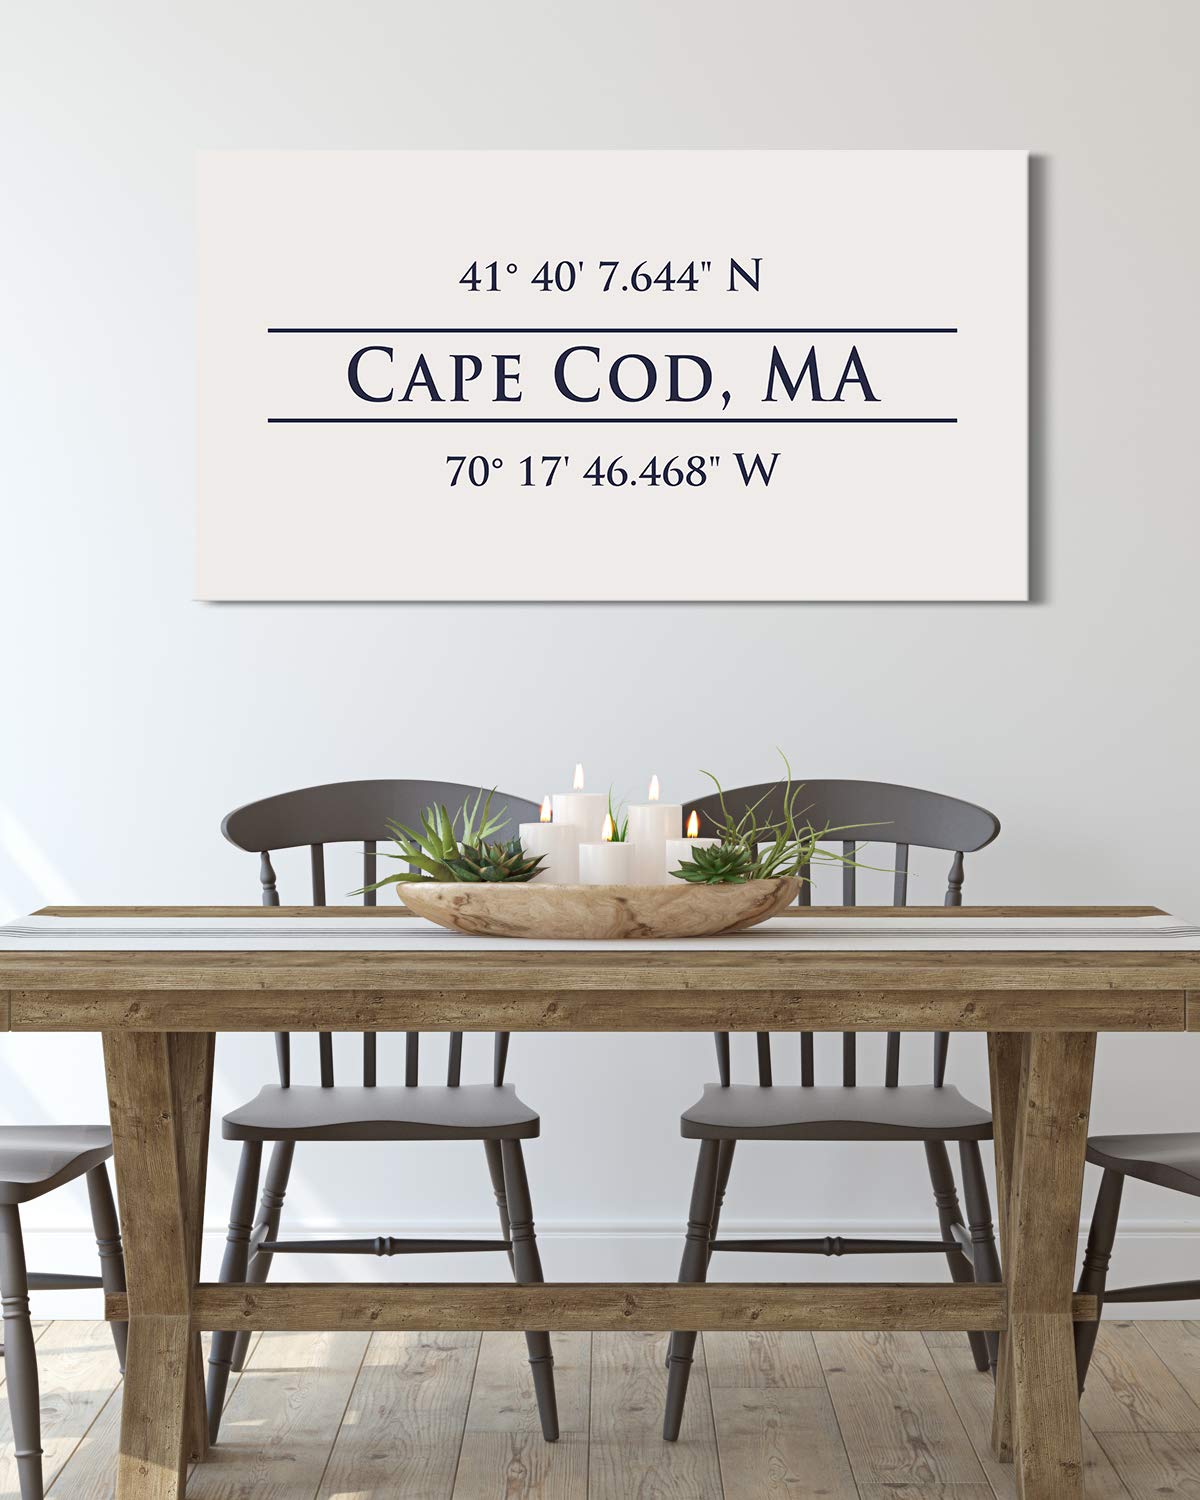 Cape Cod, MA 41° 40' 7.644" N, 70° 17' 46.468" W - Wall Decor Art Canvas with an offwhite background - Ready to Hang - Great for above a couch, table, bed or more